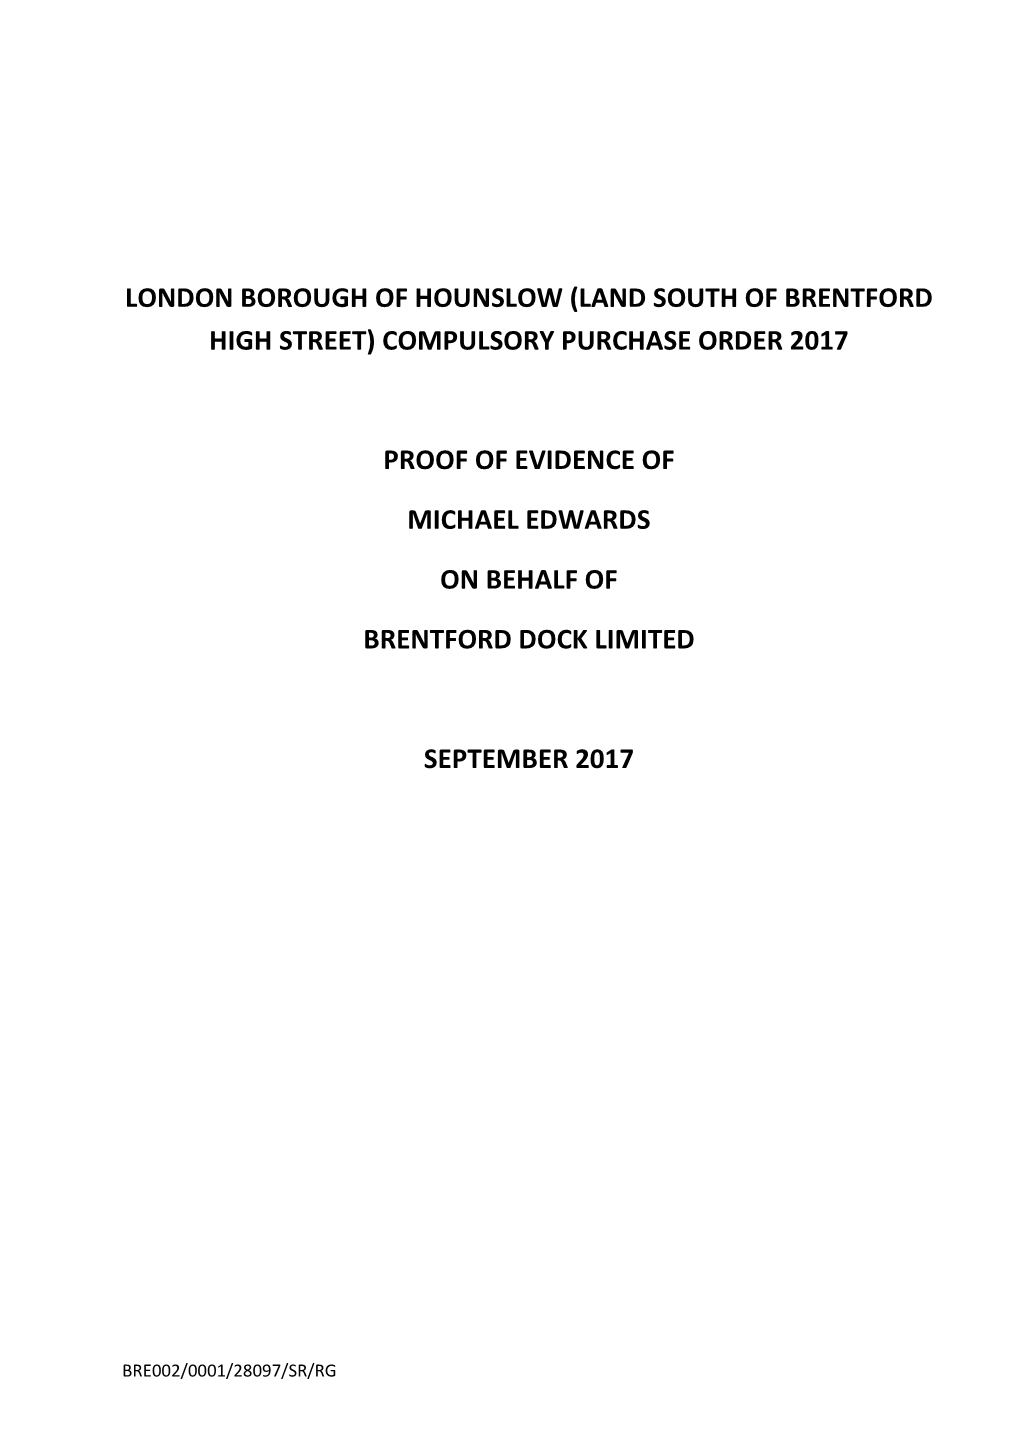 London Borough of Hounslow (Land South of Brentford High Street) Compulsory Purchase Order 2017